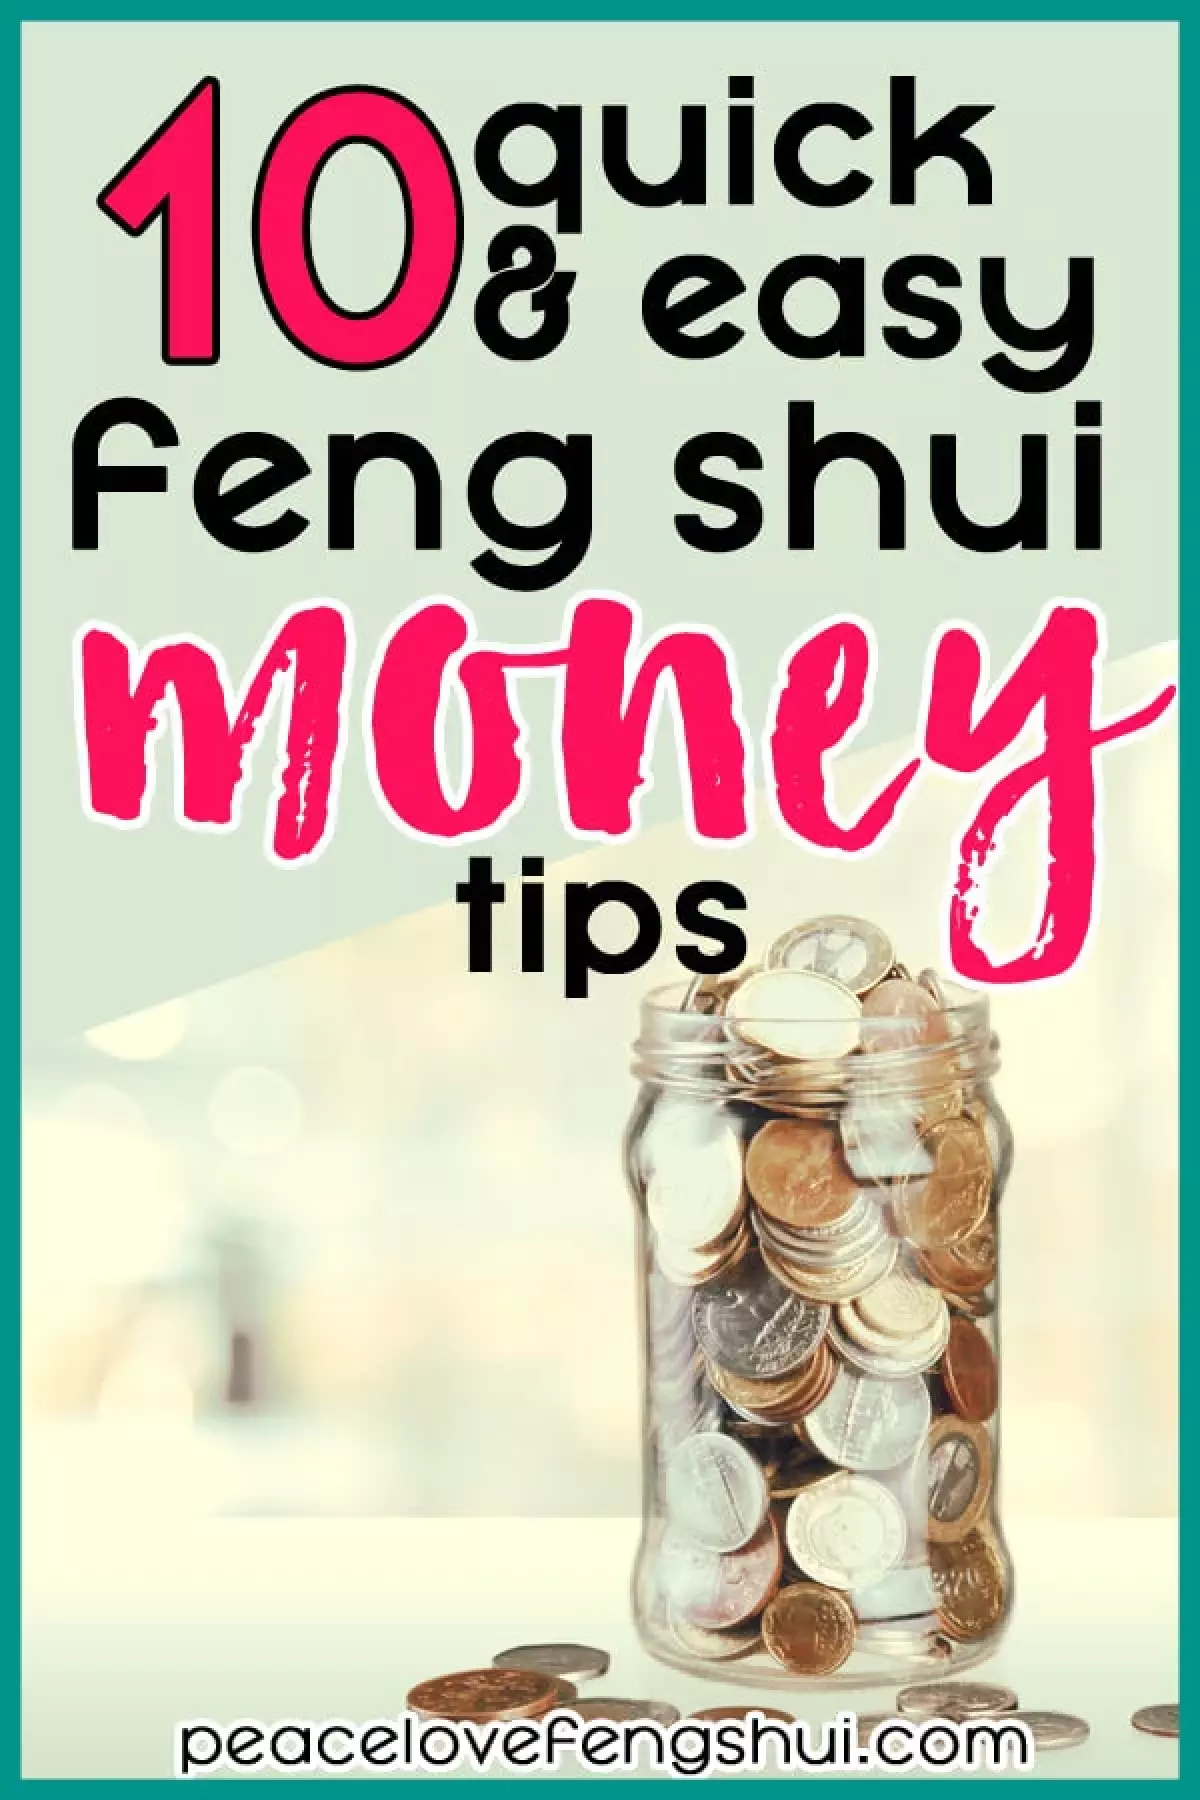 10 easy feng shui money tips you can use today to bring more abundance into your life and home!